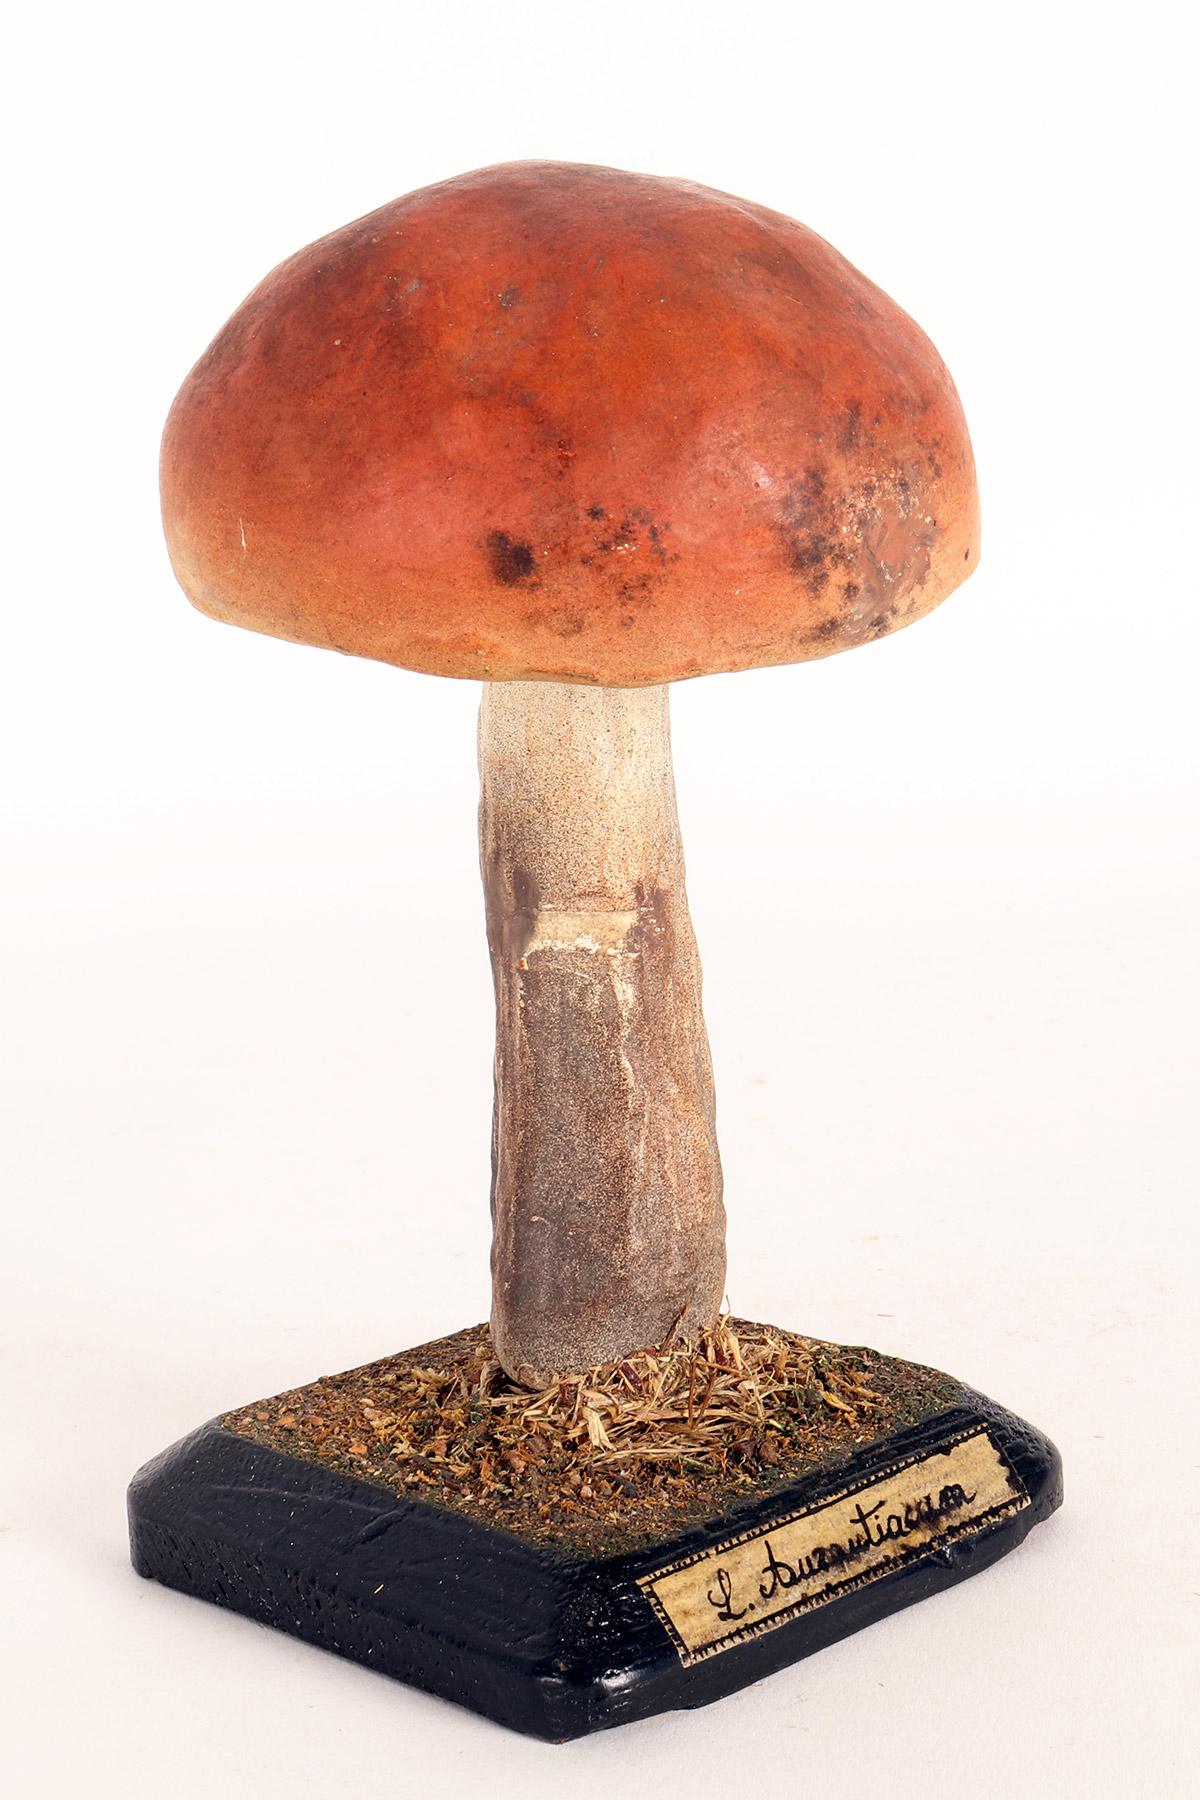 A model for pharmacy of mushroom specimen Aurantiacum. Made out of plaster watercolored. Square wooden black base with moss and hay. It shows on the front one label with the scientific name of the specimen handwritten with ink. Italy circa 1890.